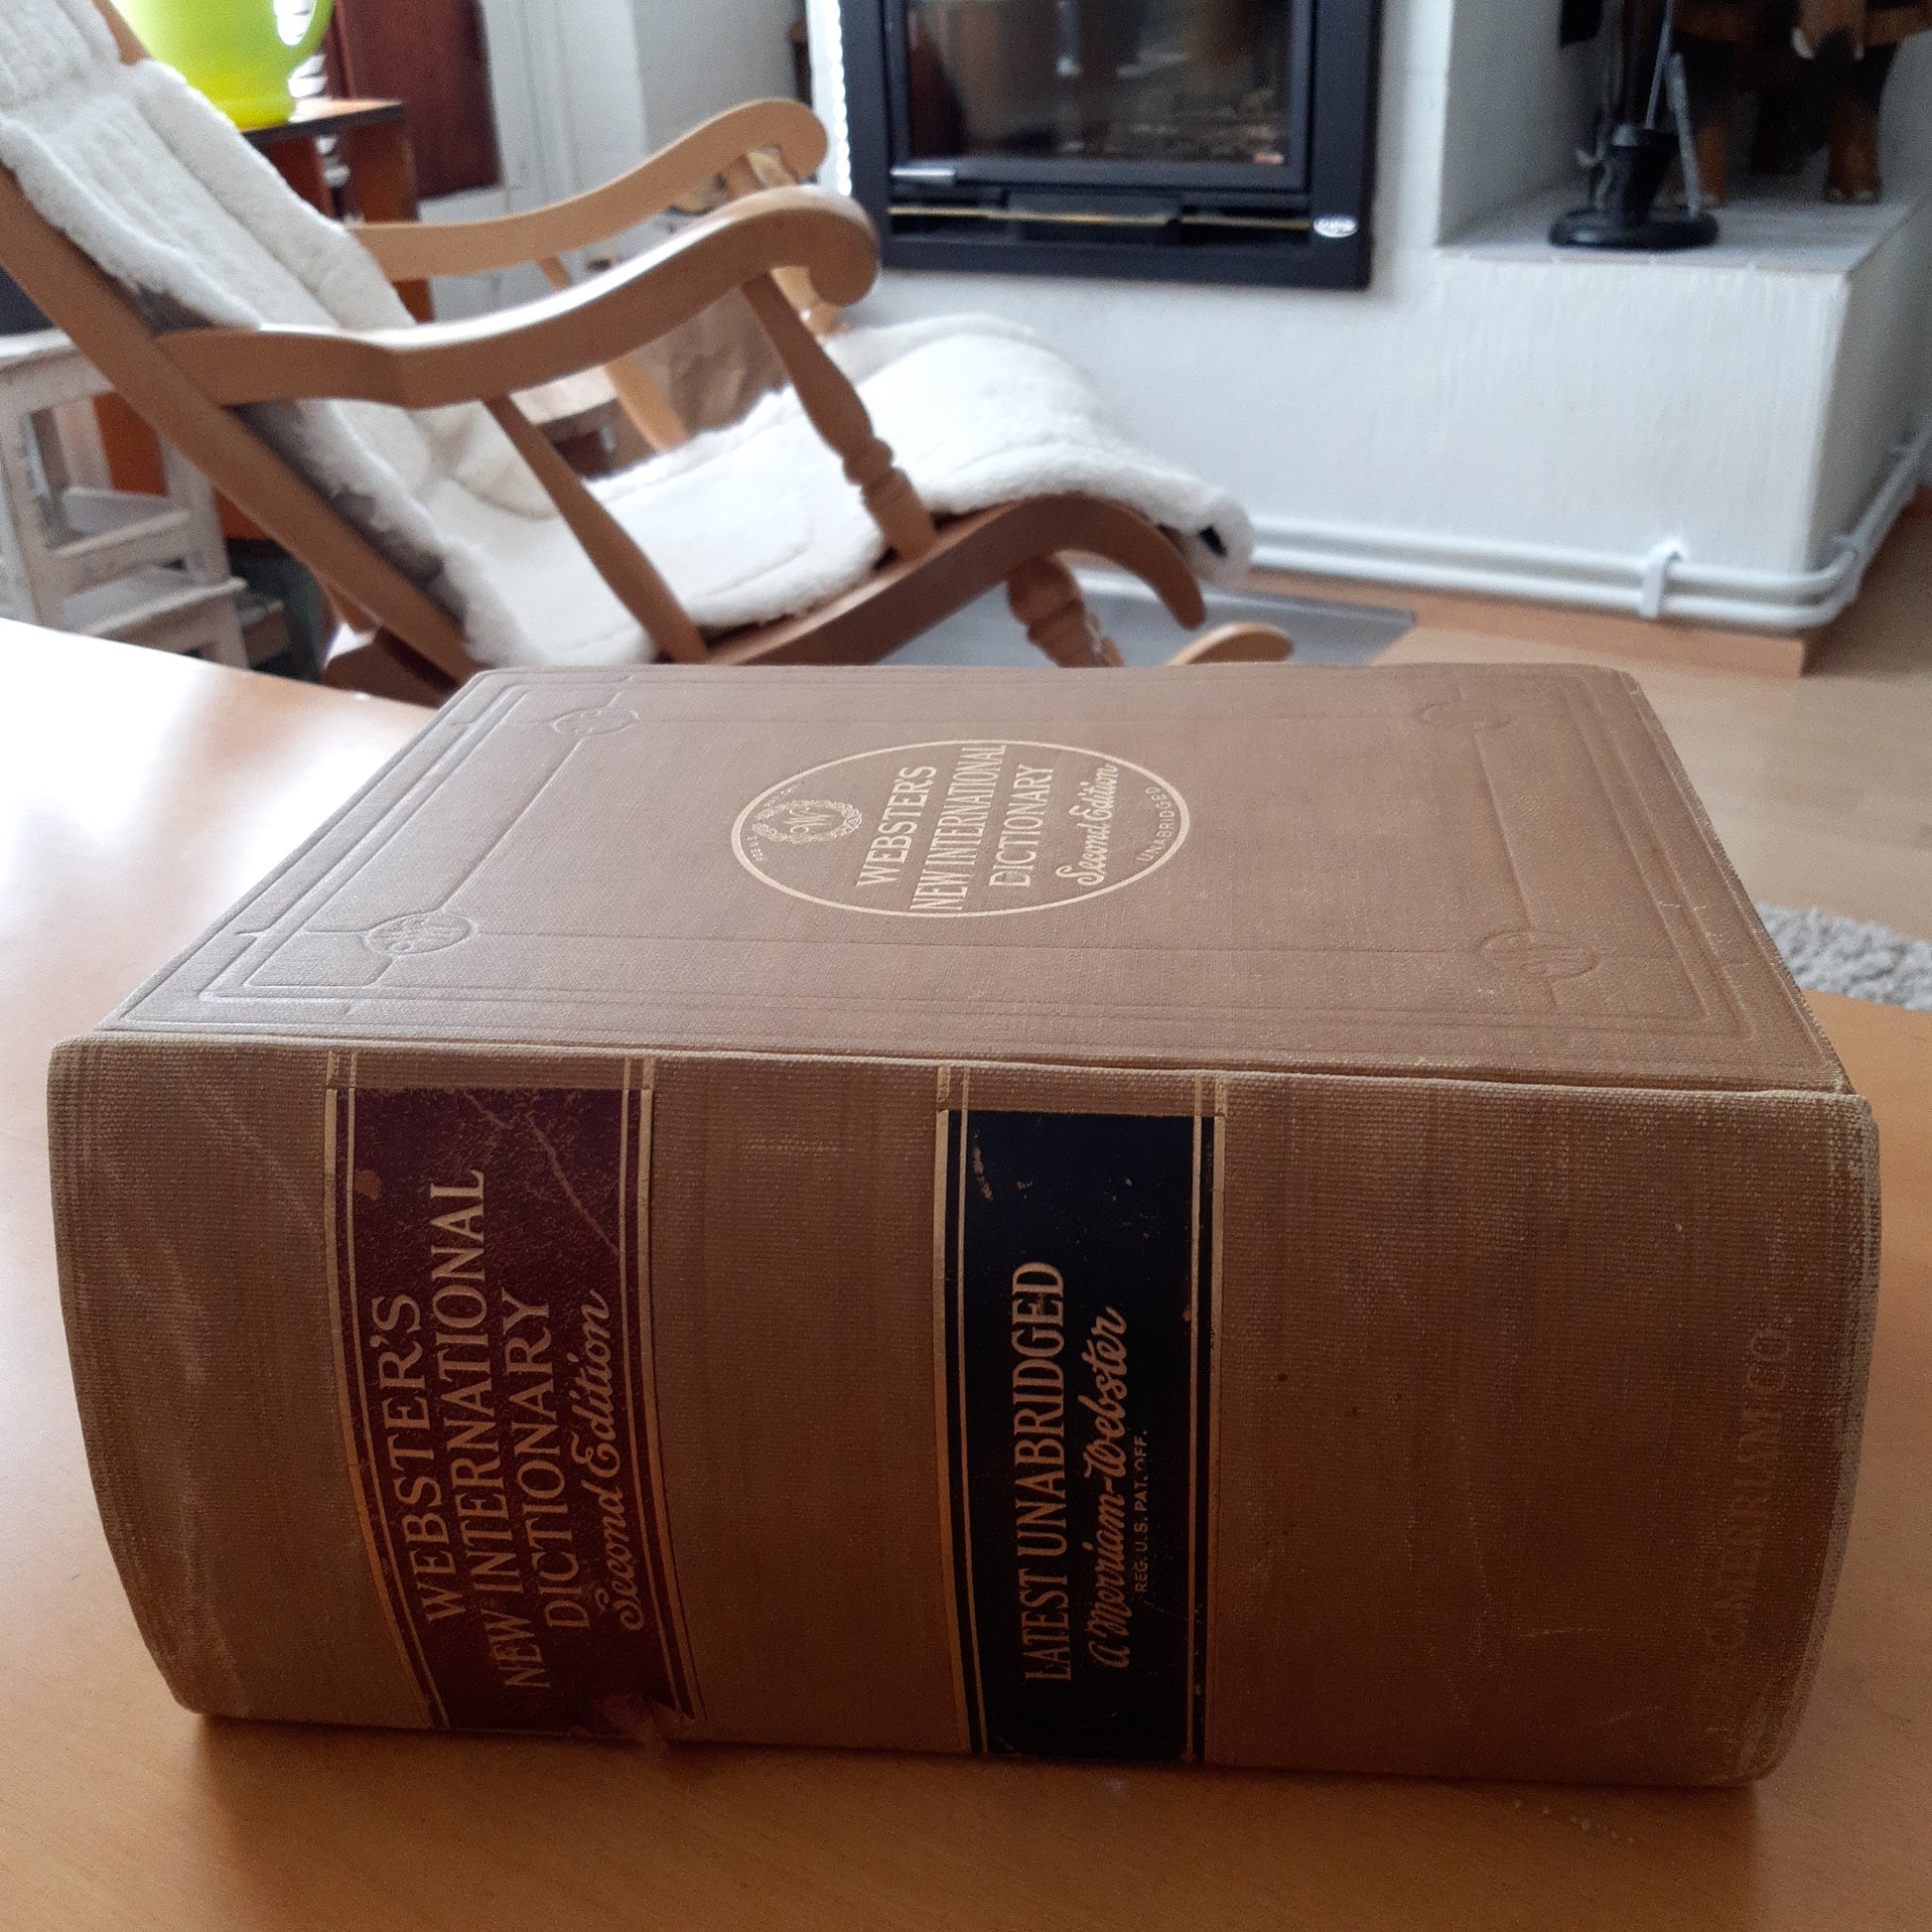 webster's new international dictionary - second edition - latest unabridged 1947